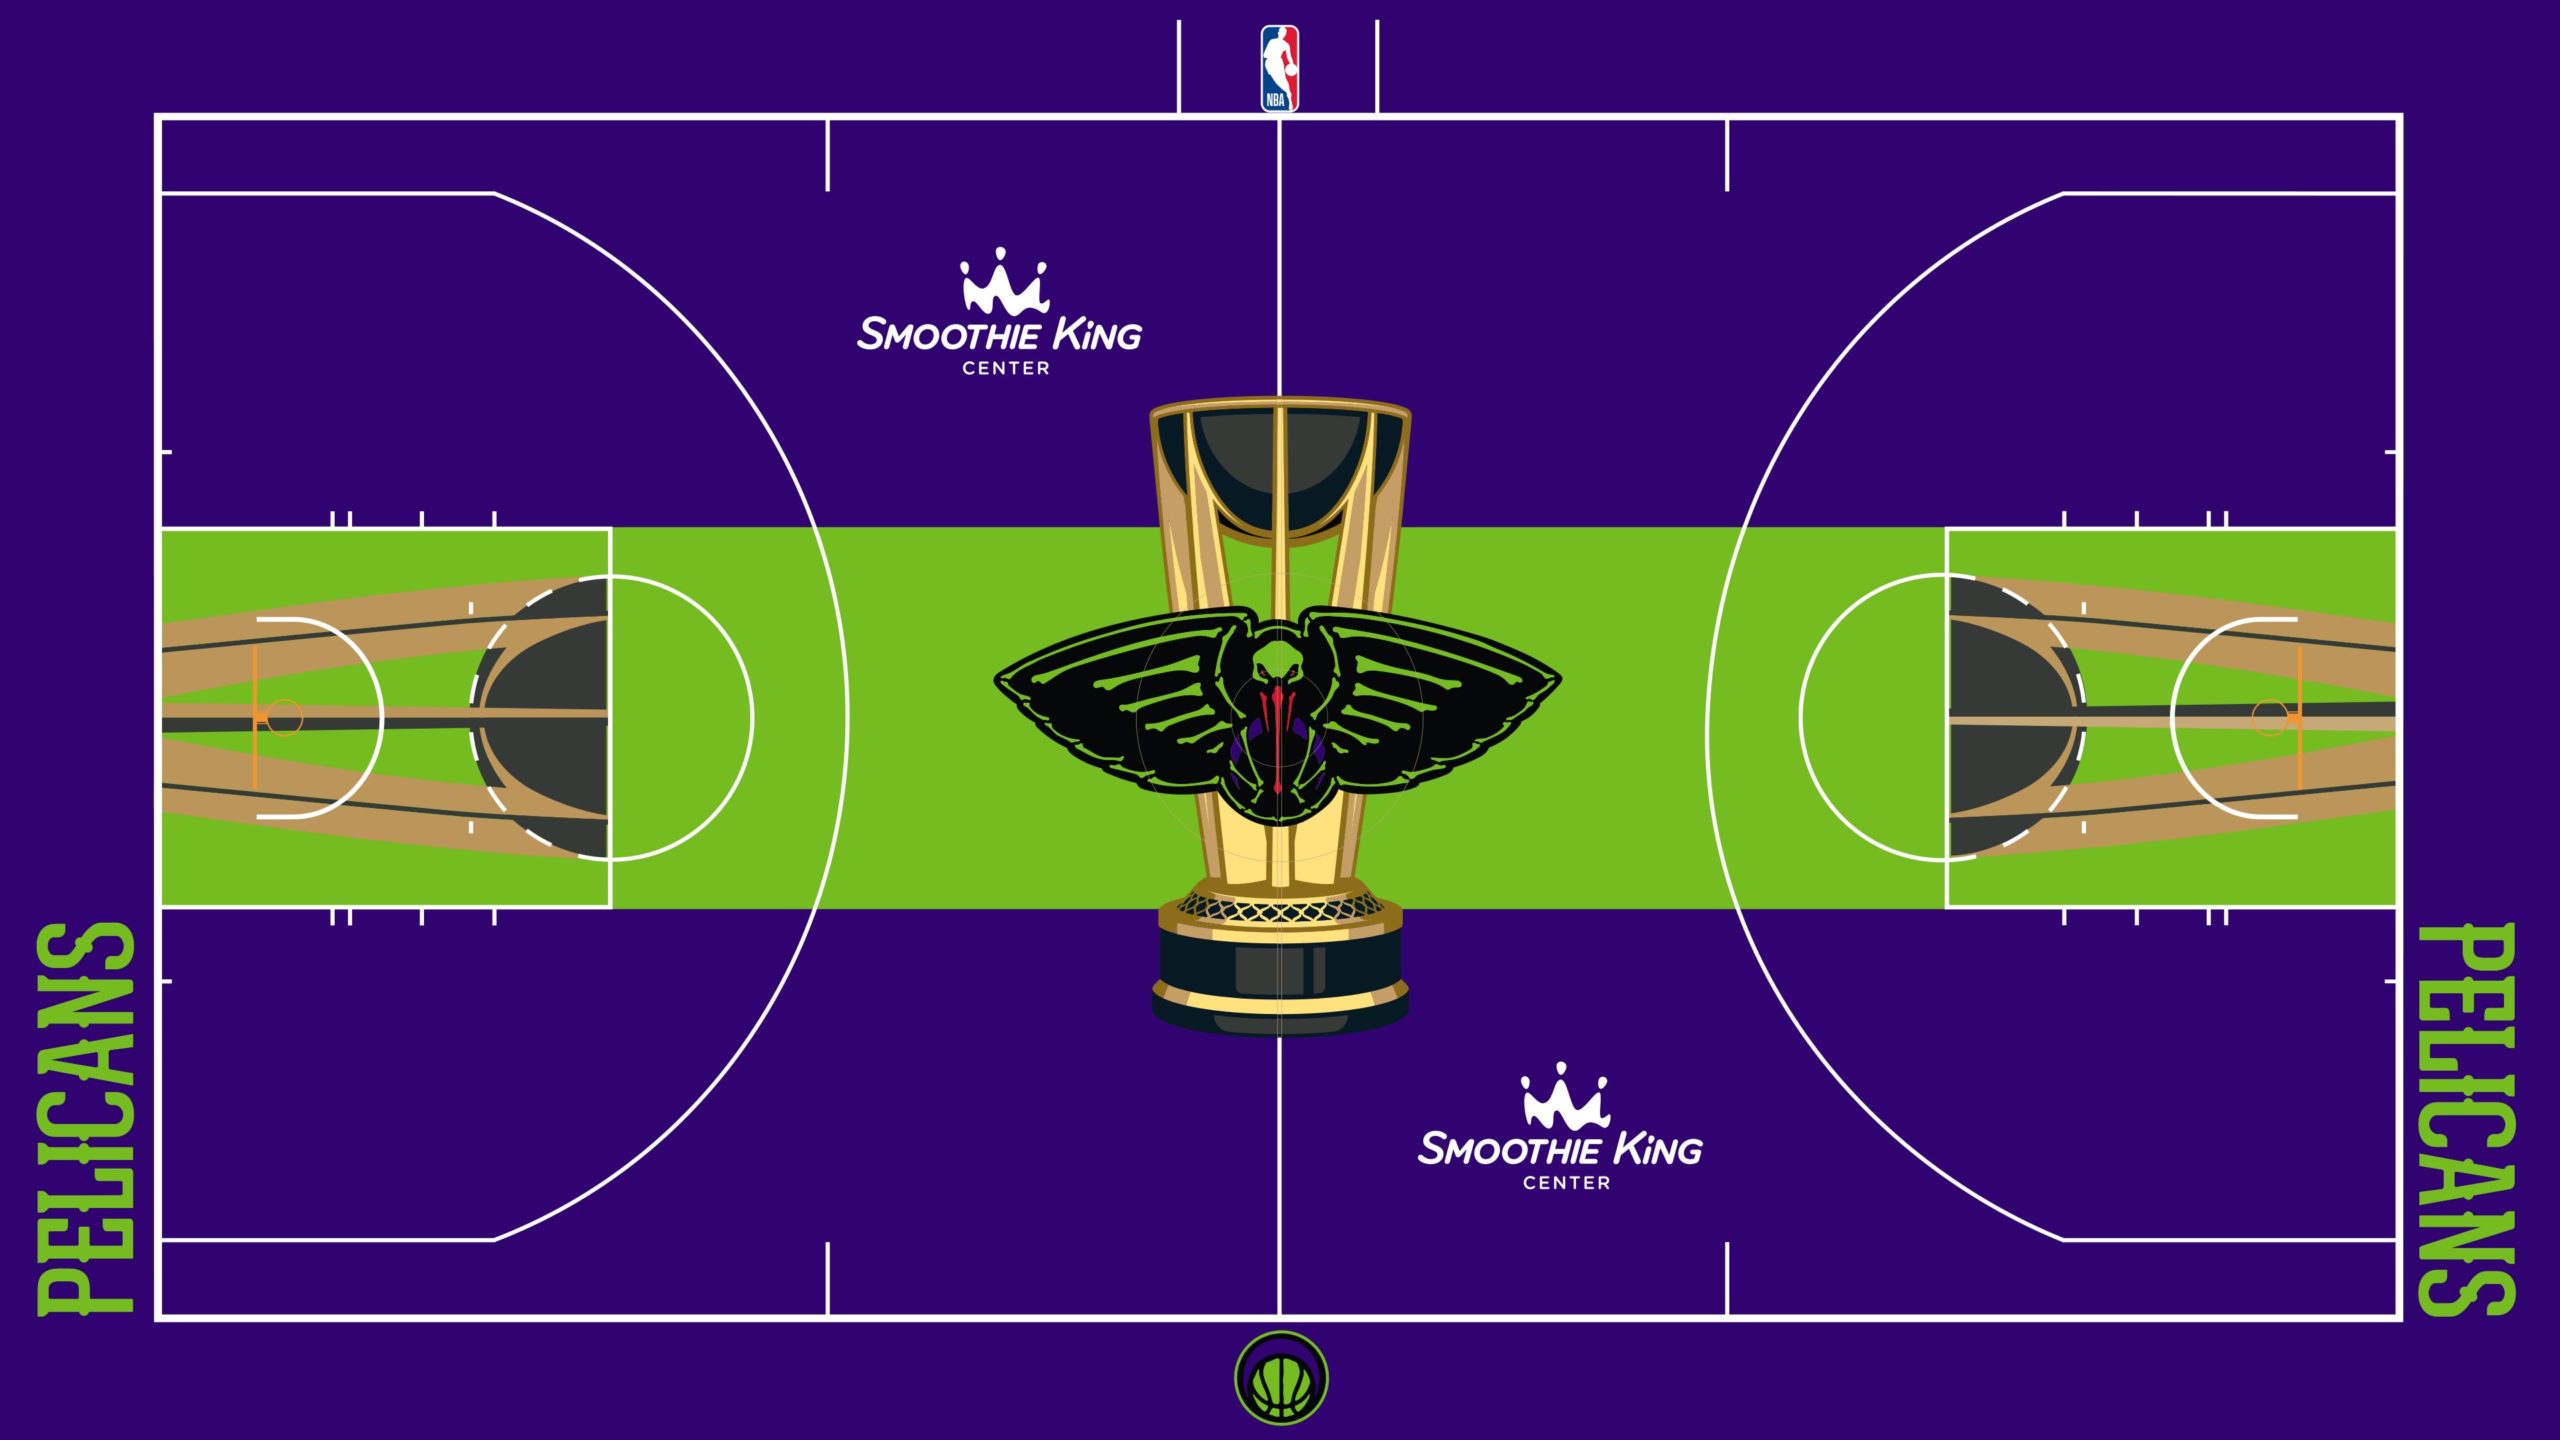 These are the new court designs for the NBA Cup